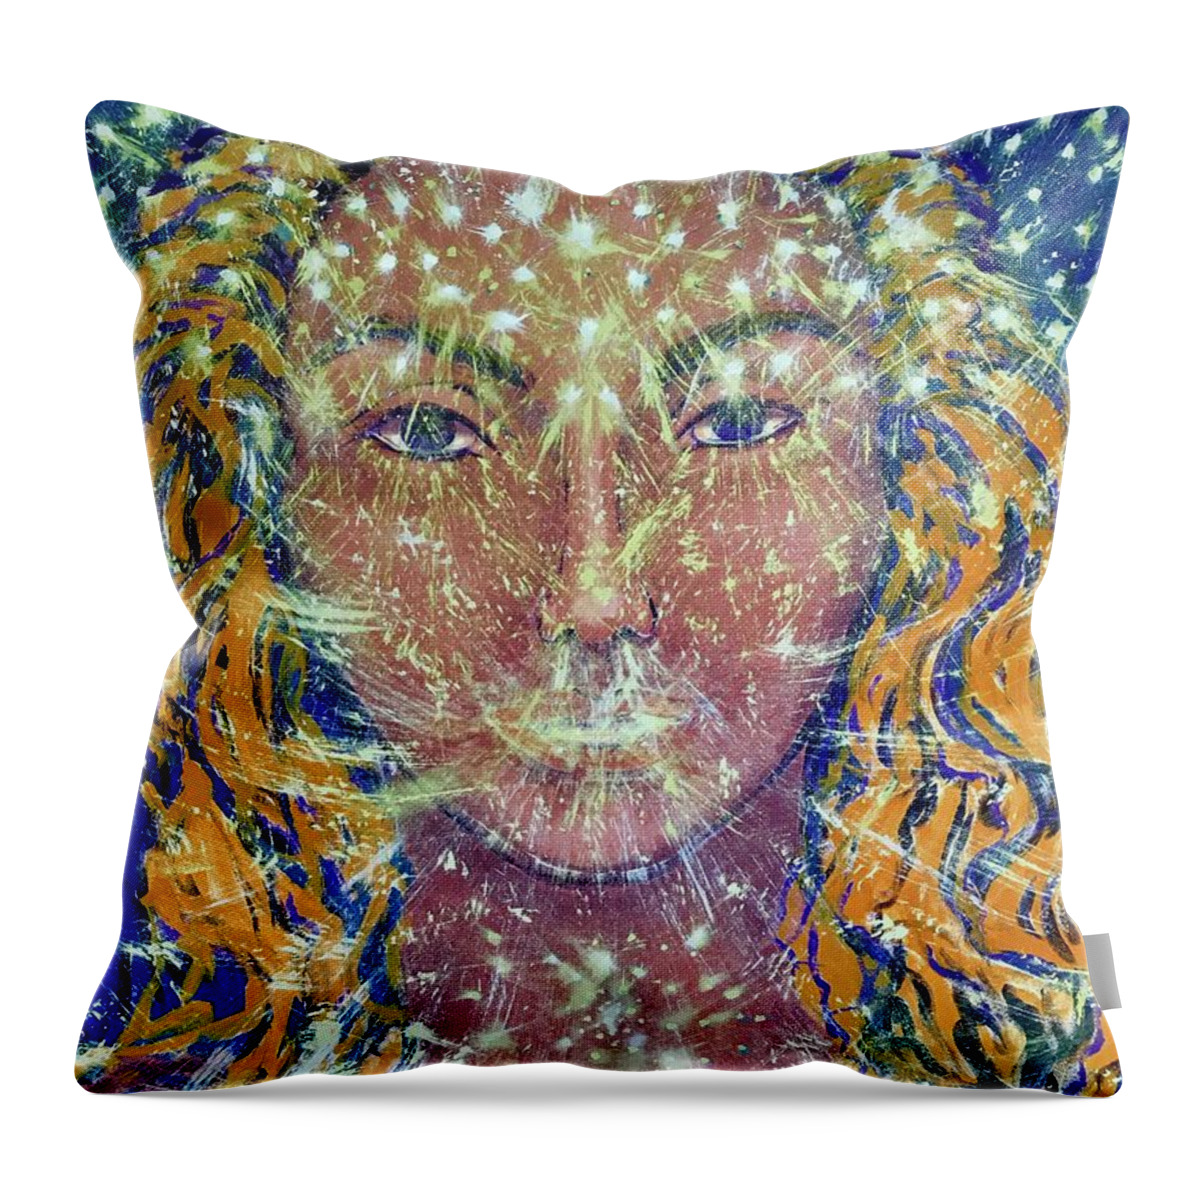 Archangel Michael Throw Pillow featuring the painting Archangel Michael. I am with you by Monica Elena